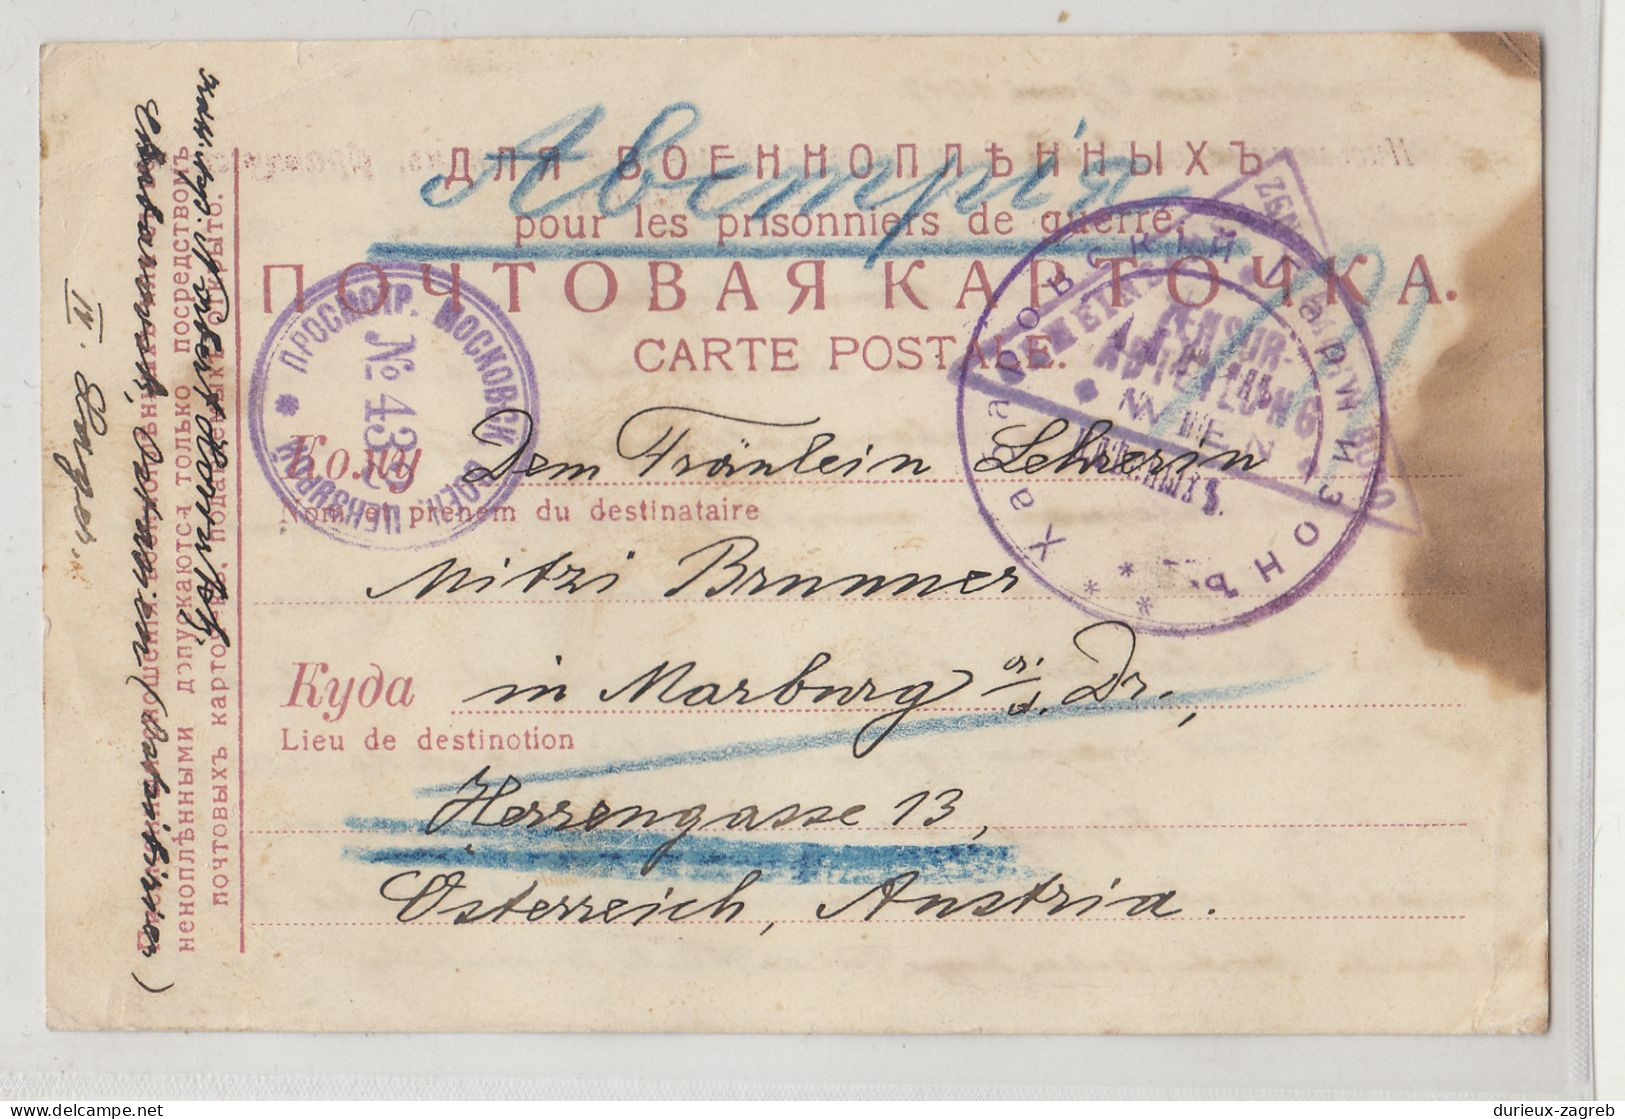 Russia WWI POW Postcard Posted 1917 Habarovsk To Marburg A.D. B240510 - Entiers Postaux